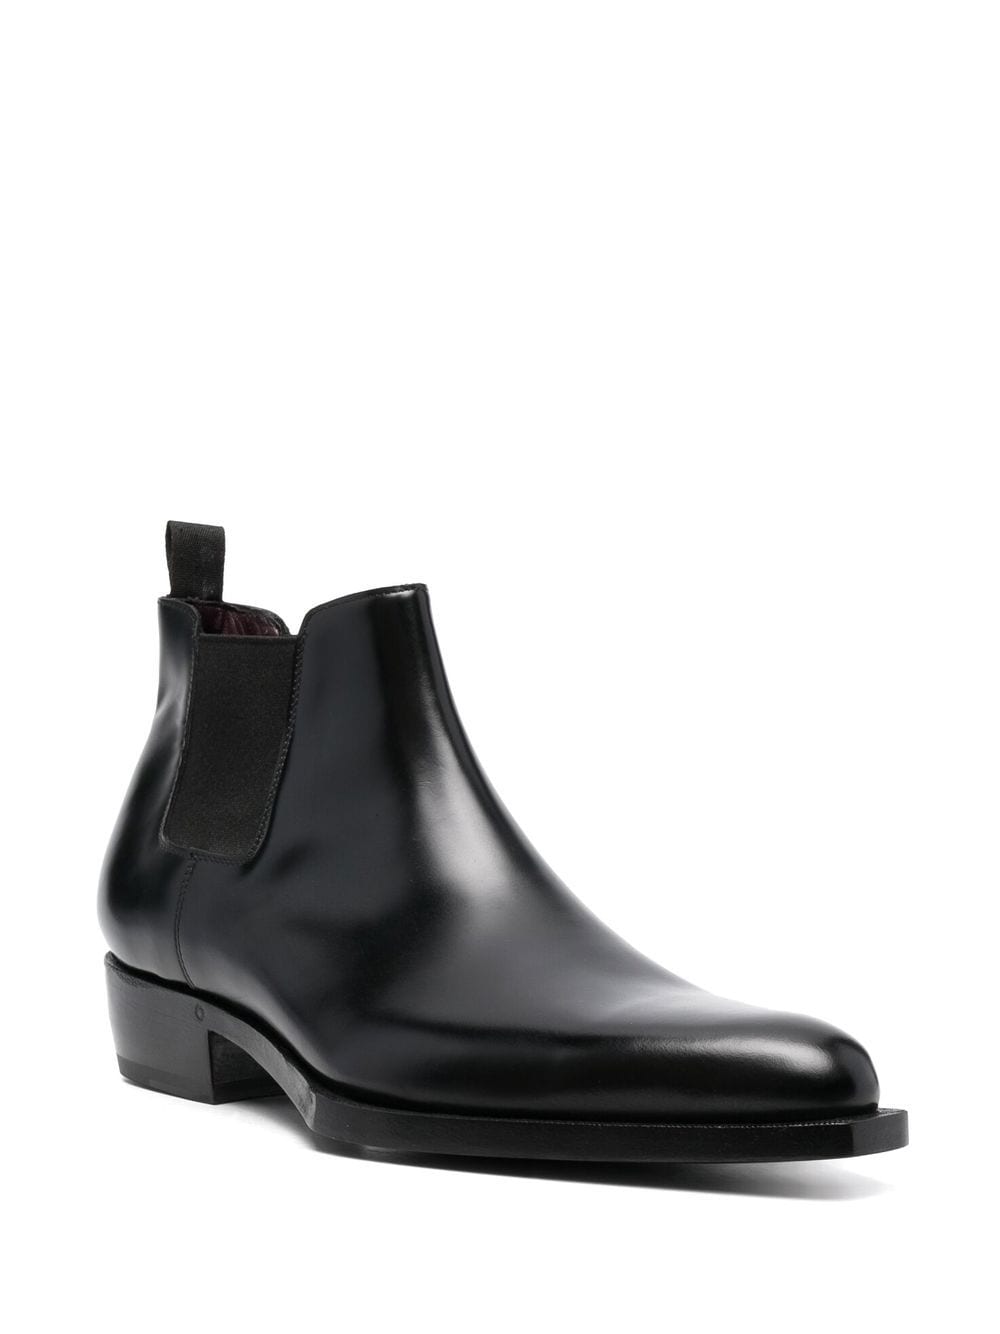 Lidfort pointed-toe Leather Chelsea Boots - Farfetch